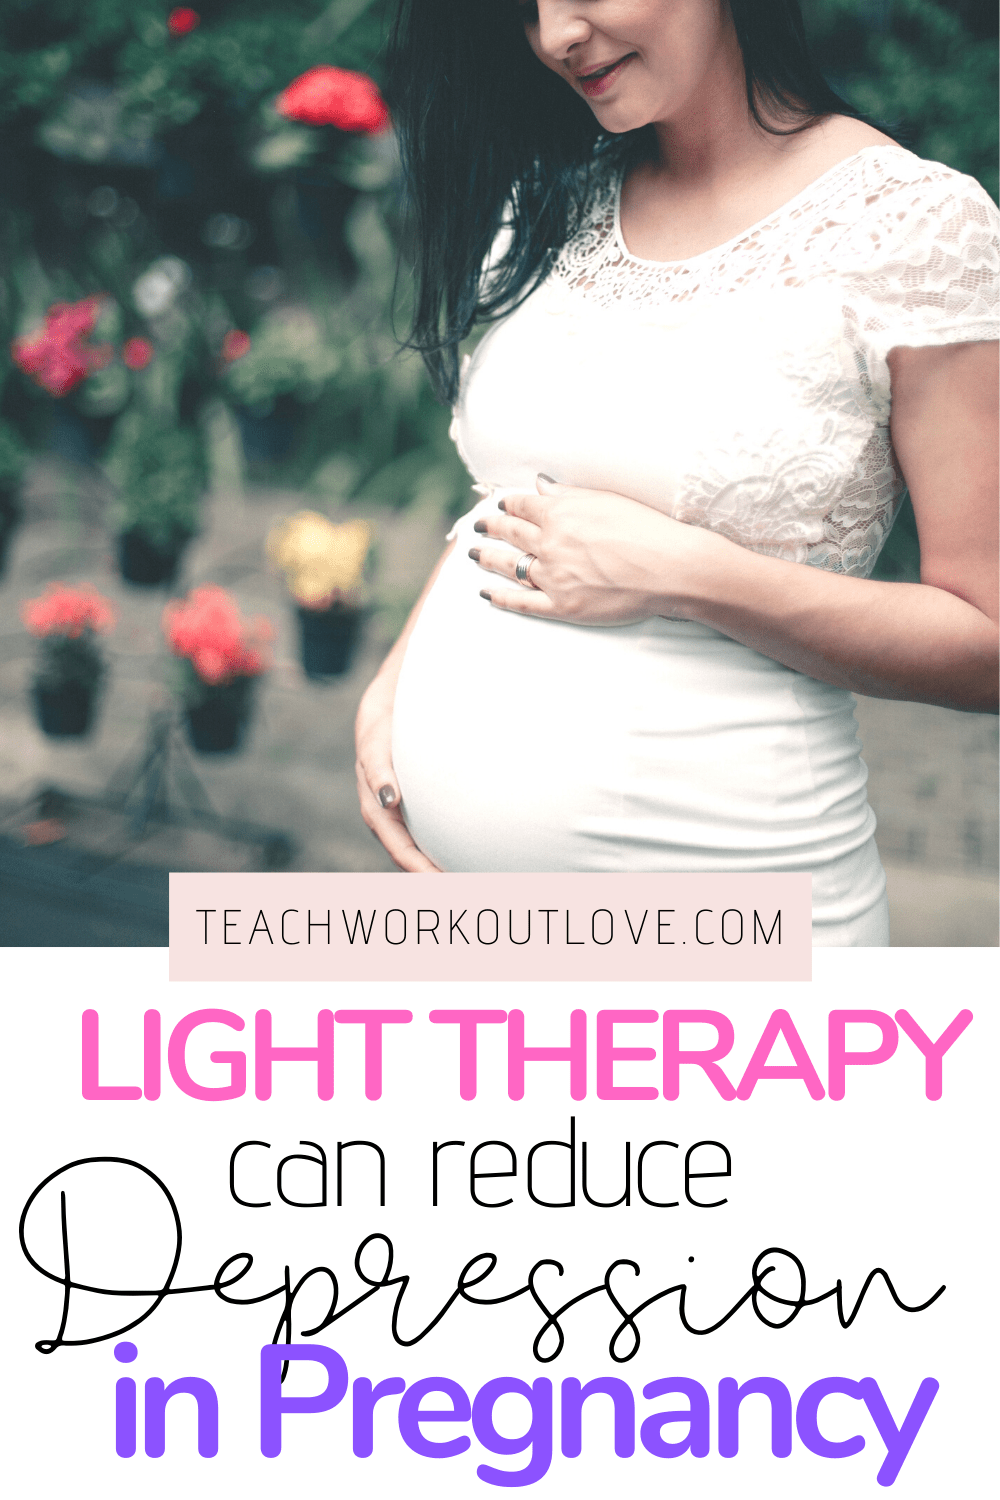 Bright light therapy is a must-go treat for pregnant women having mild-to-moderate depressive symptoms. Bask under the morning light for half an hour!